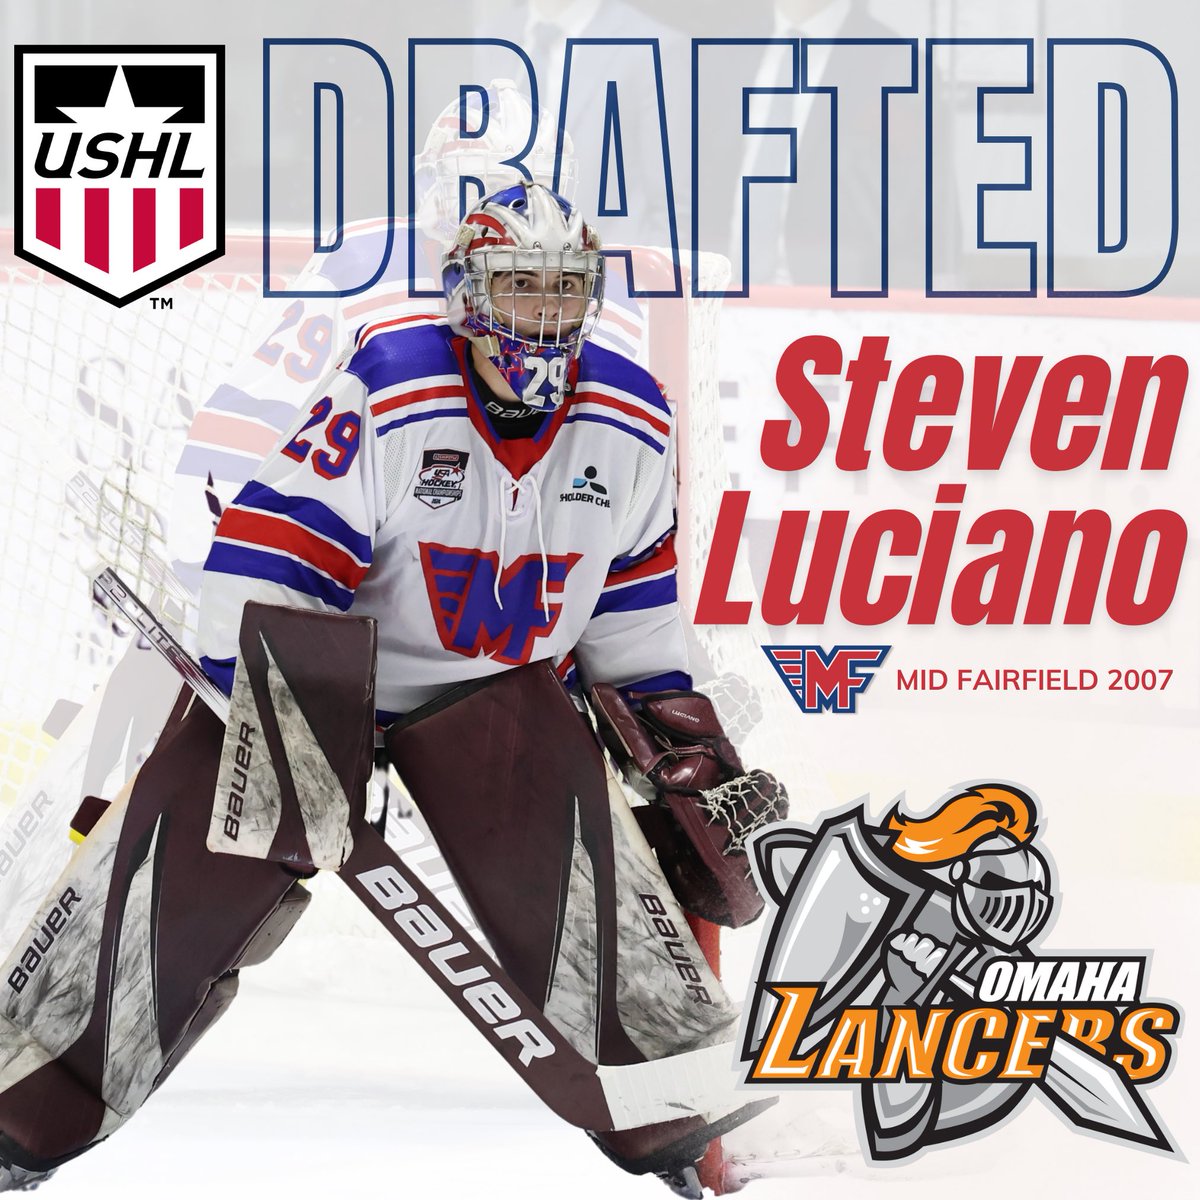 Congrats! @OmahaLancers selected 07 goalie Steven Luciano in Phase 2 of the @USHL draft #RollMF #USHLdraft